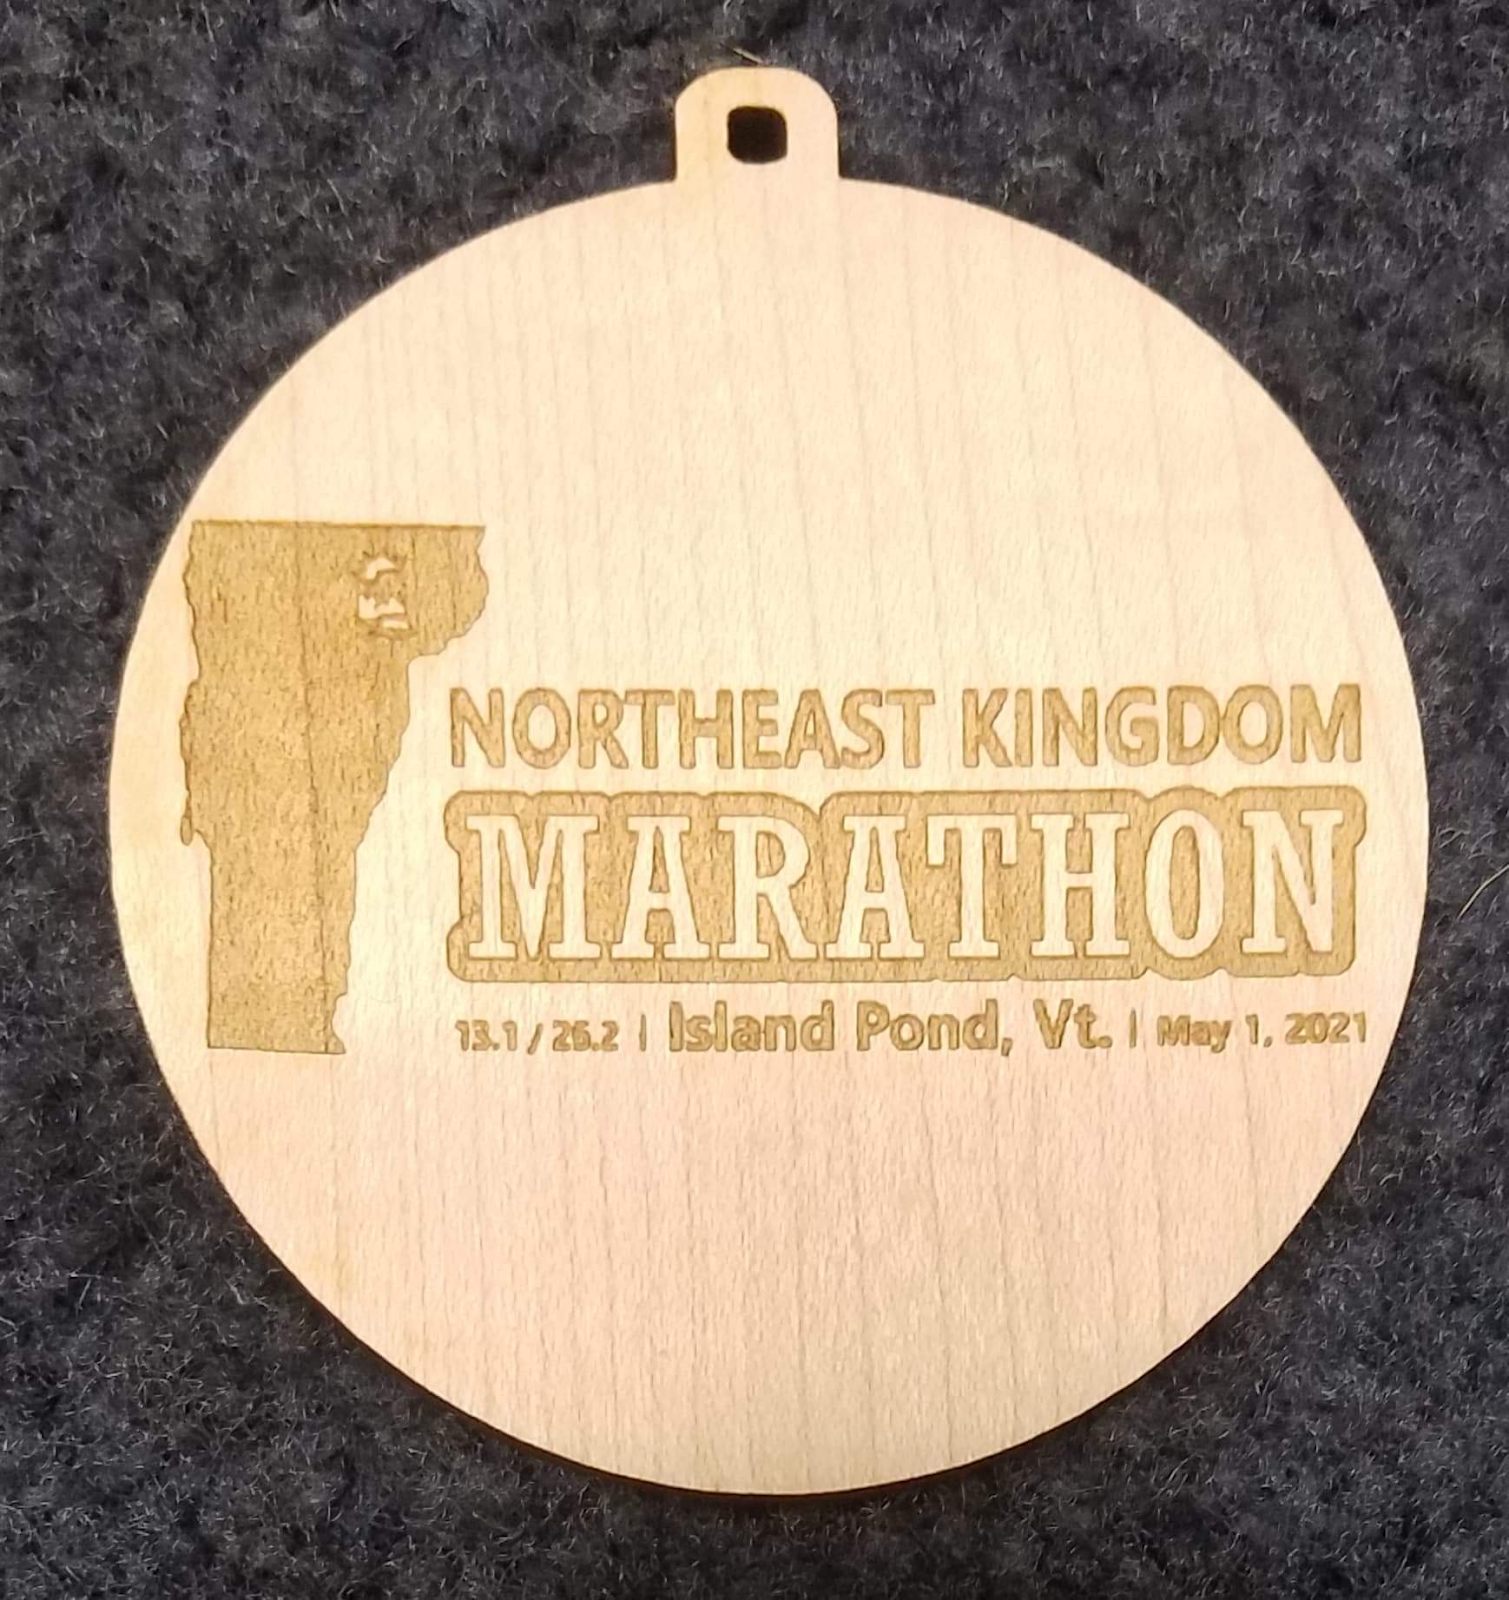 the wooden medal showing the state of Vermont and the words "Northeast Kingdom Marathon 13.1/26.2   Island Pond, VT    May 1, 2021"